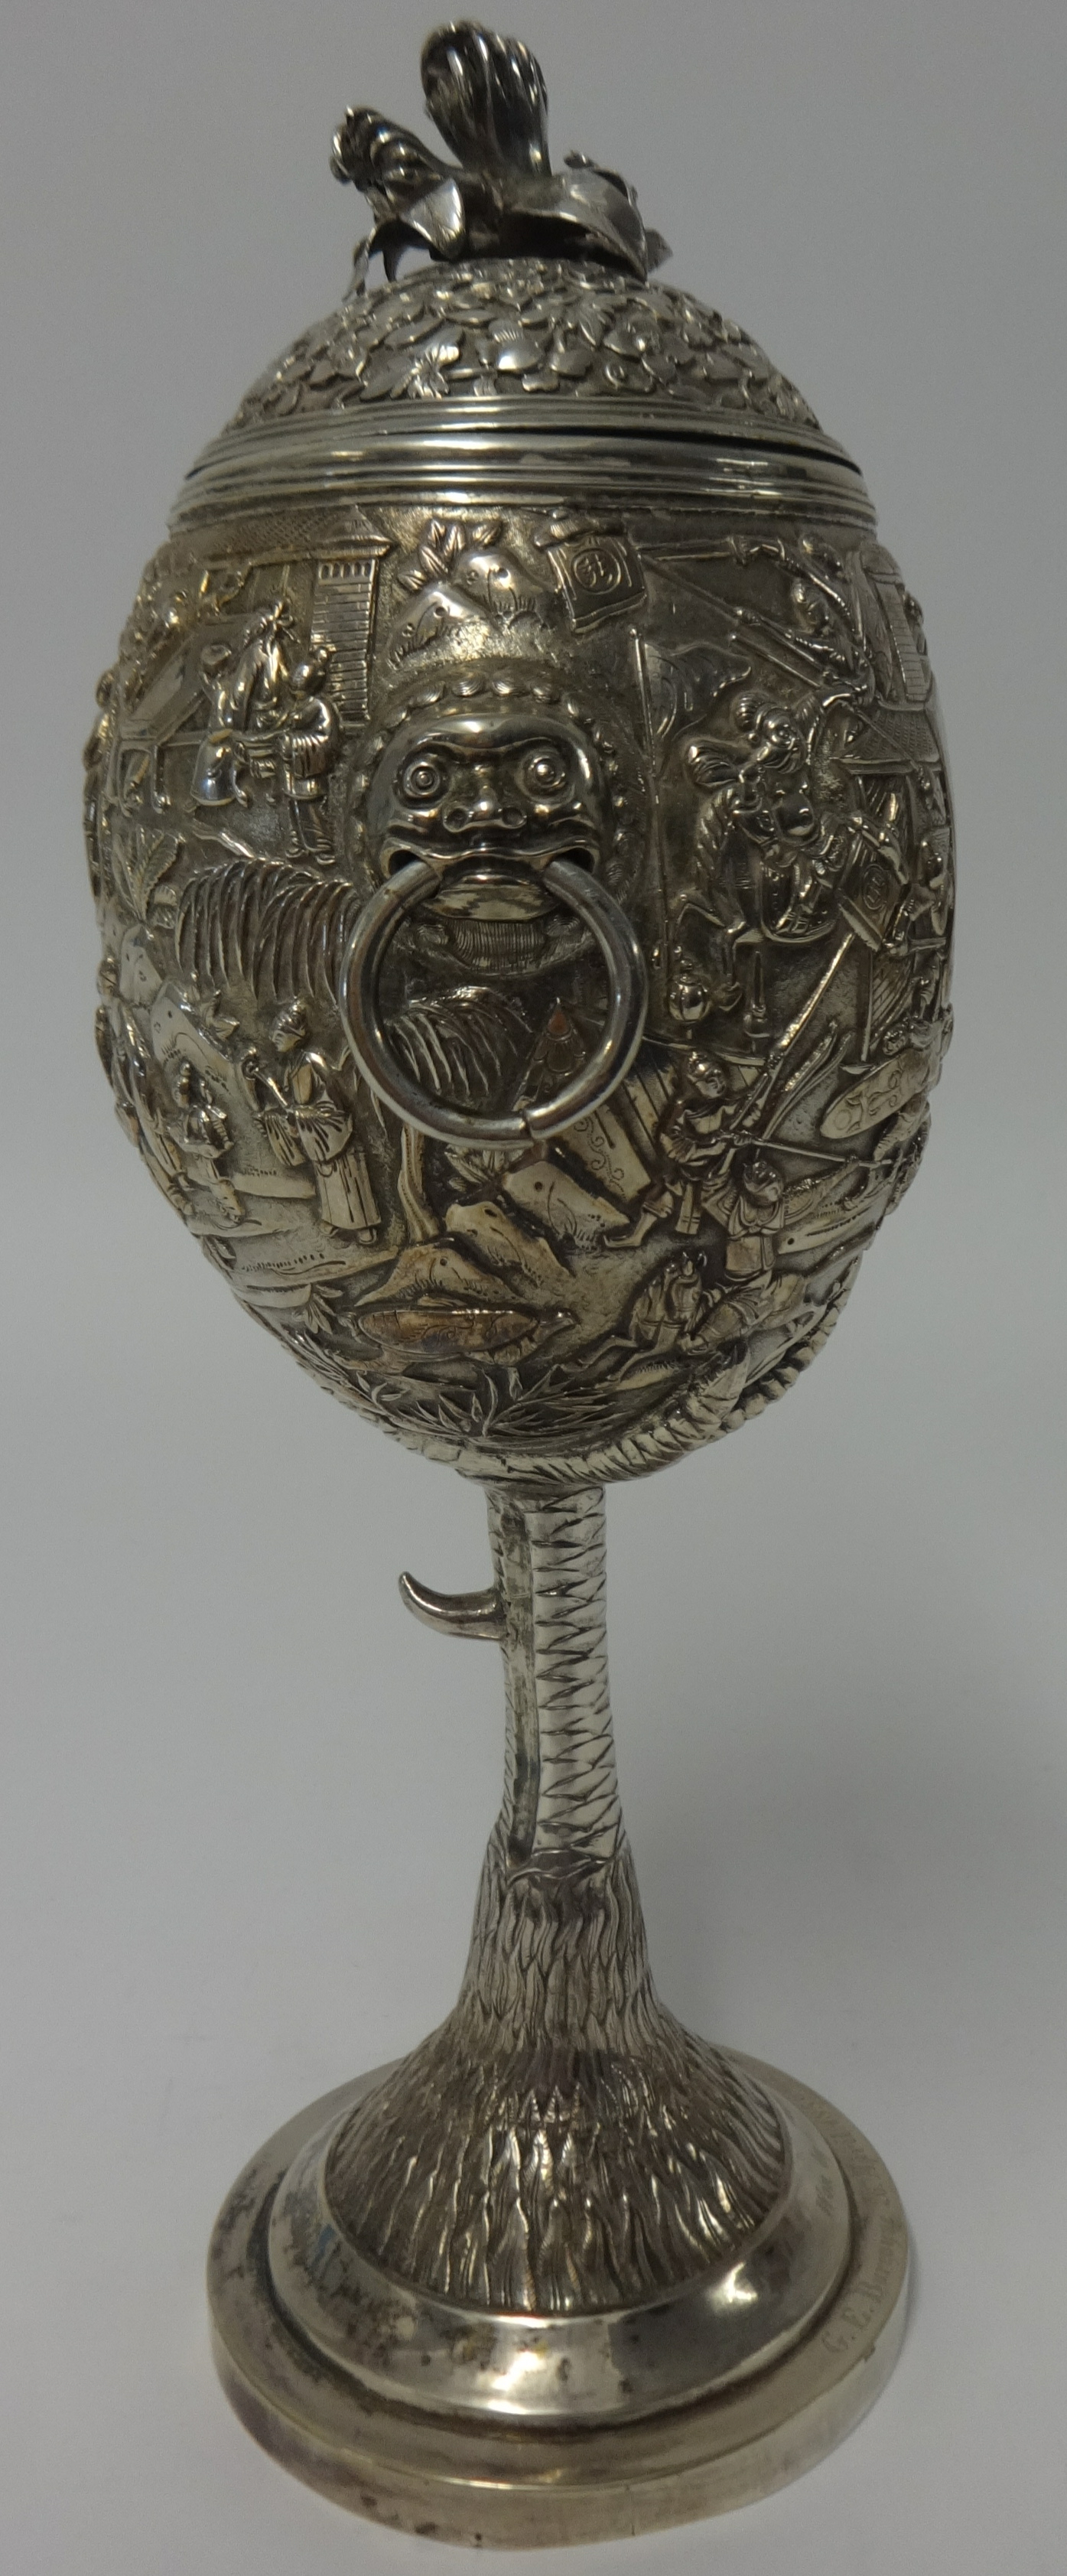 Chinese Export Silver, a Challenge Cup, richly embossed decorated with various scenes including - Image 8 of 10